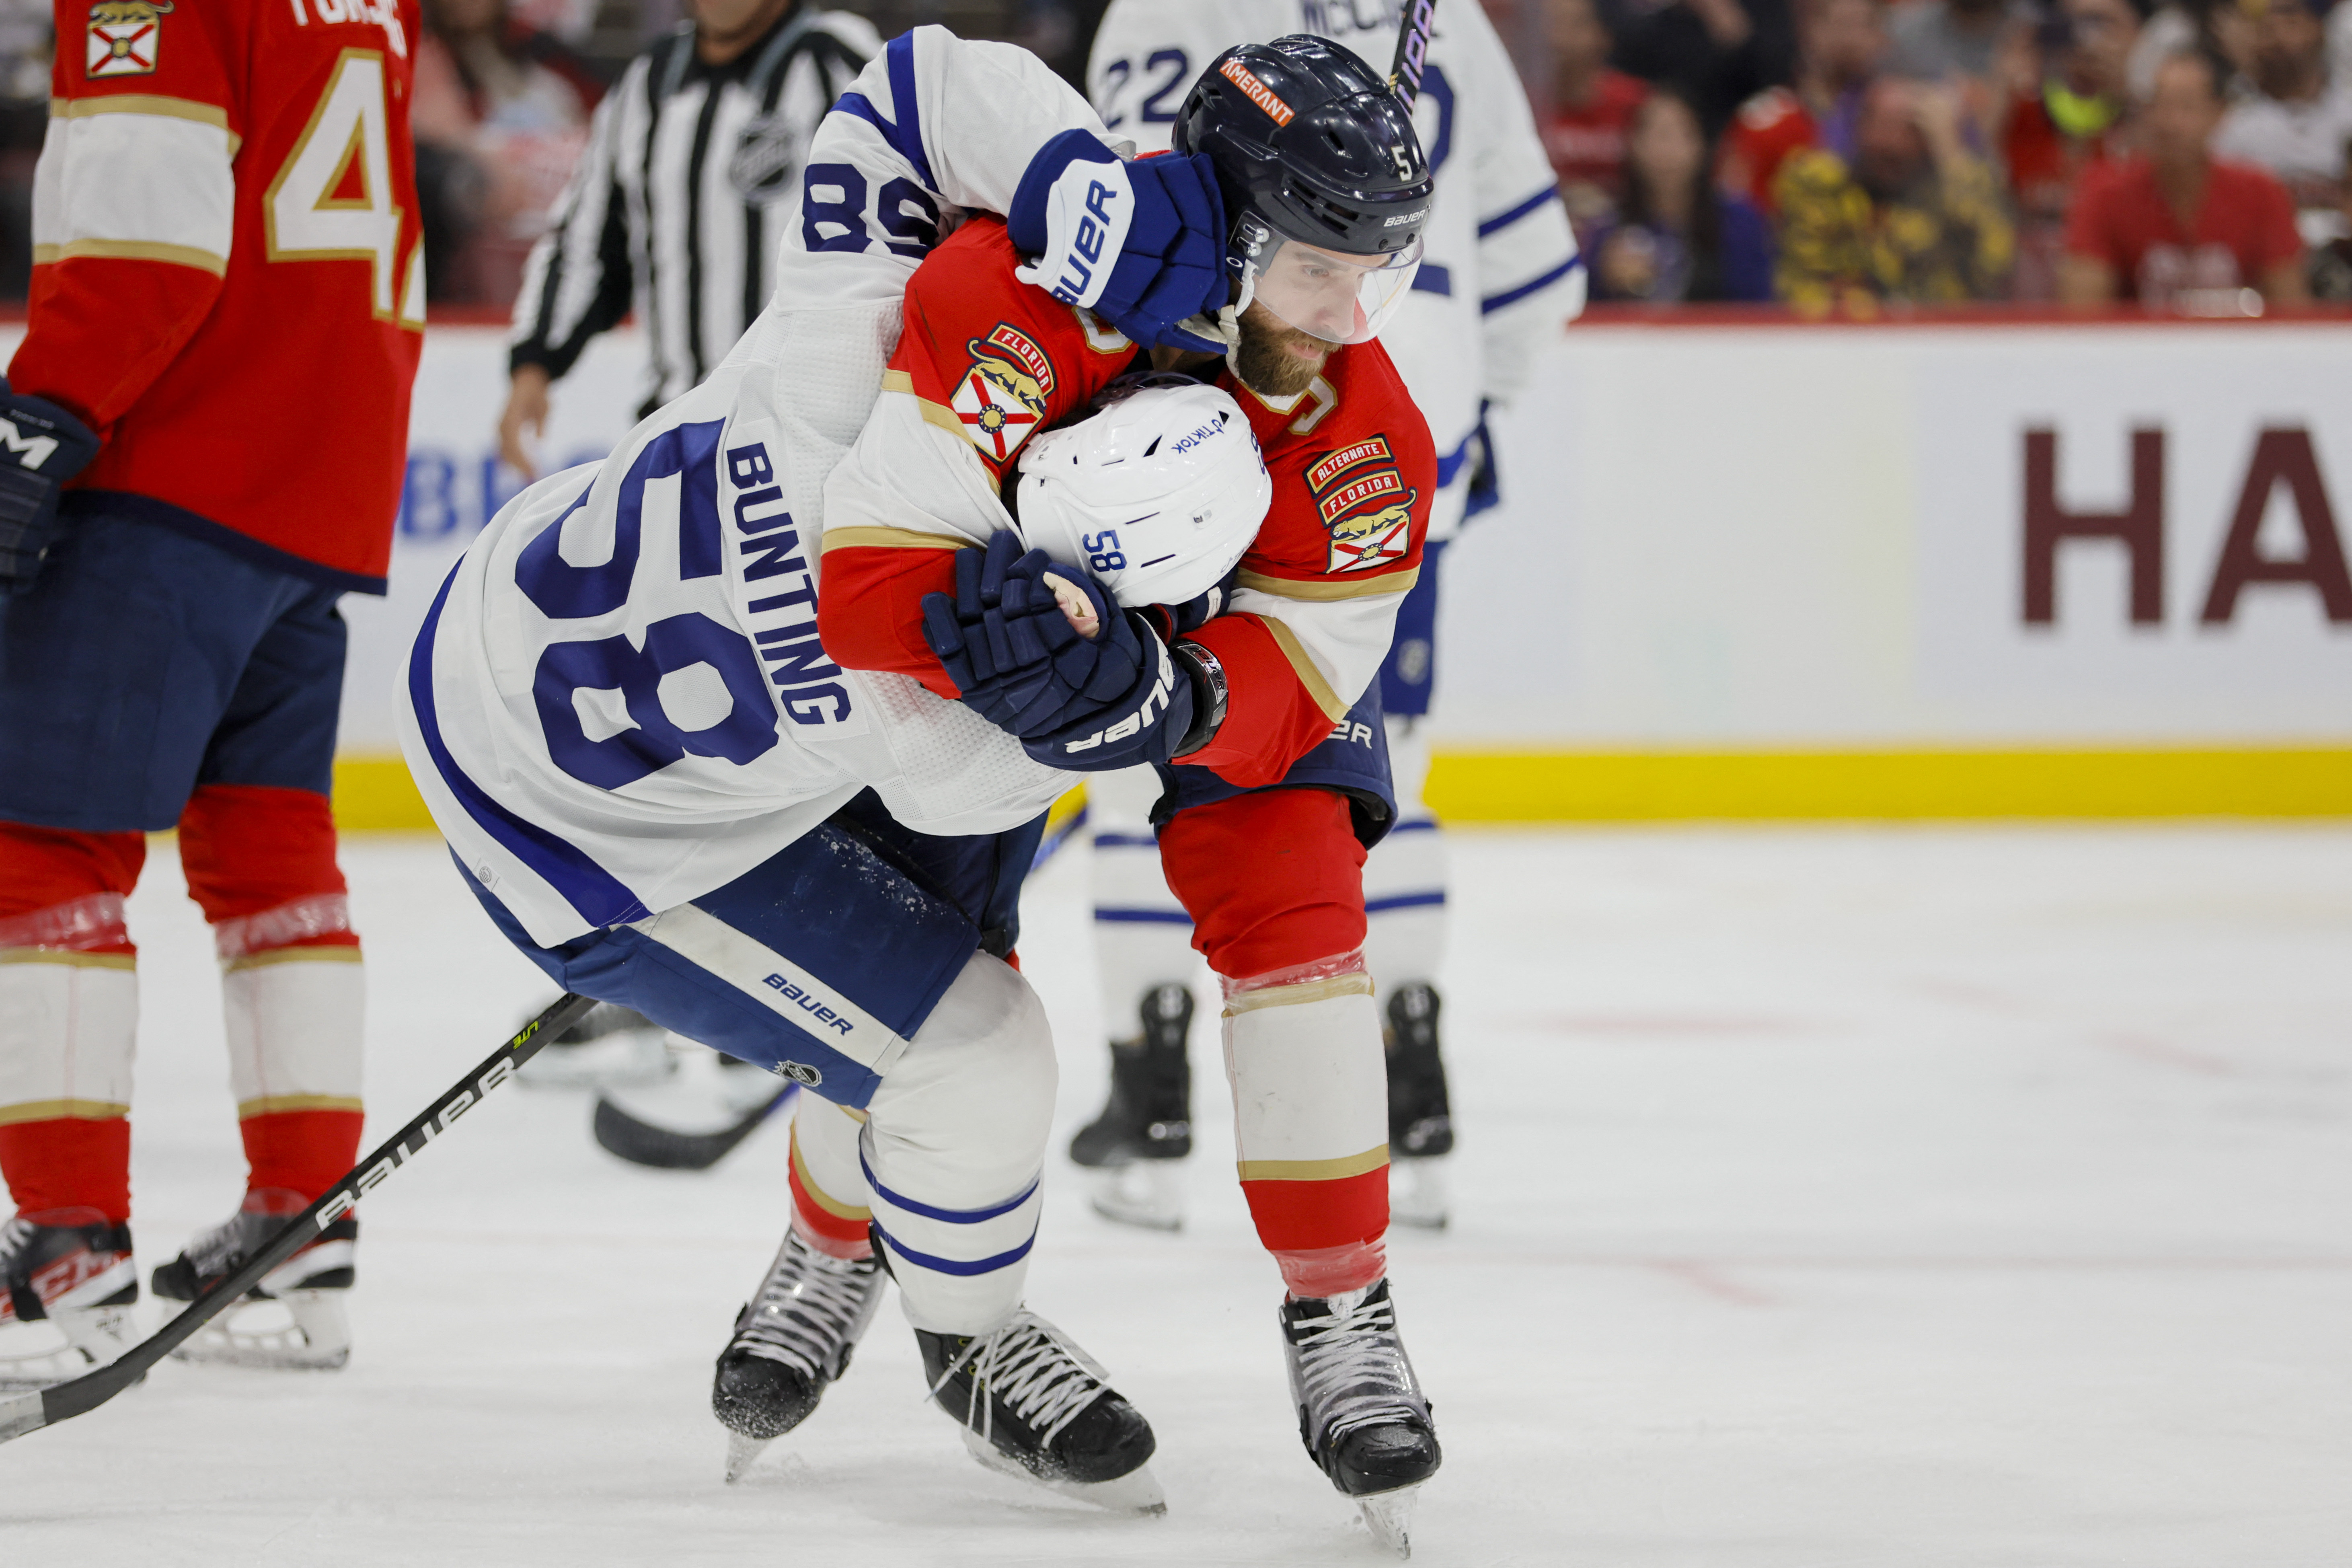 Florida Panthers defeat Toronto Maple Leafs 3-2 in OT for 3-0